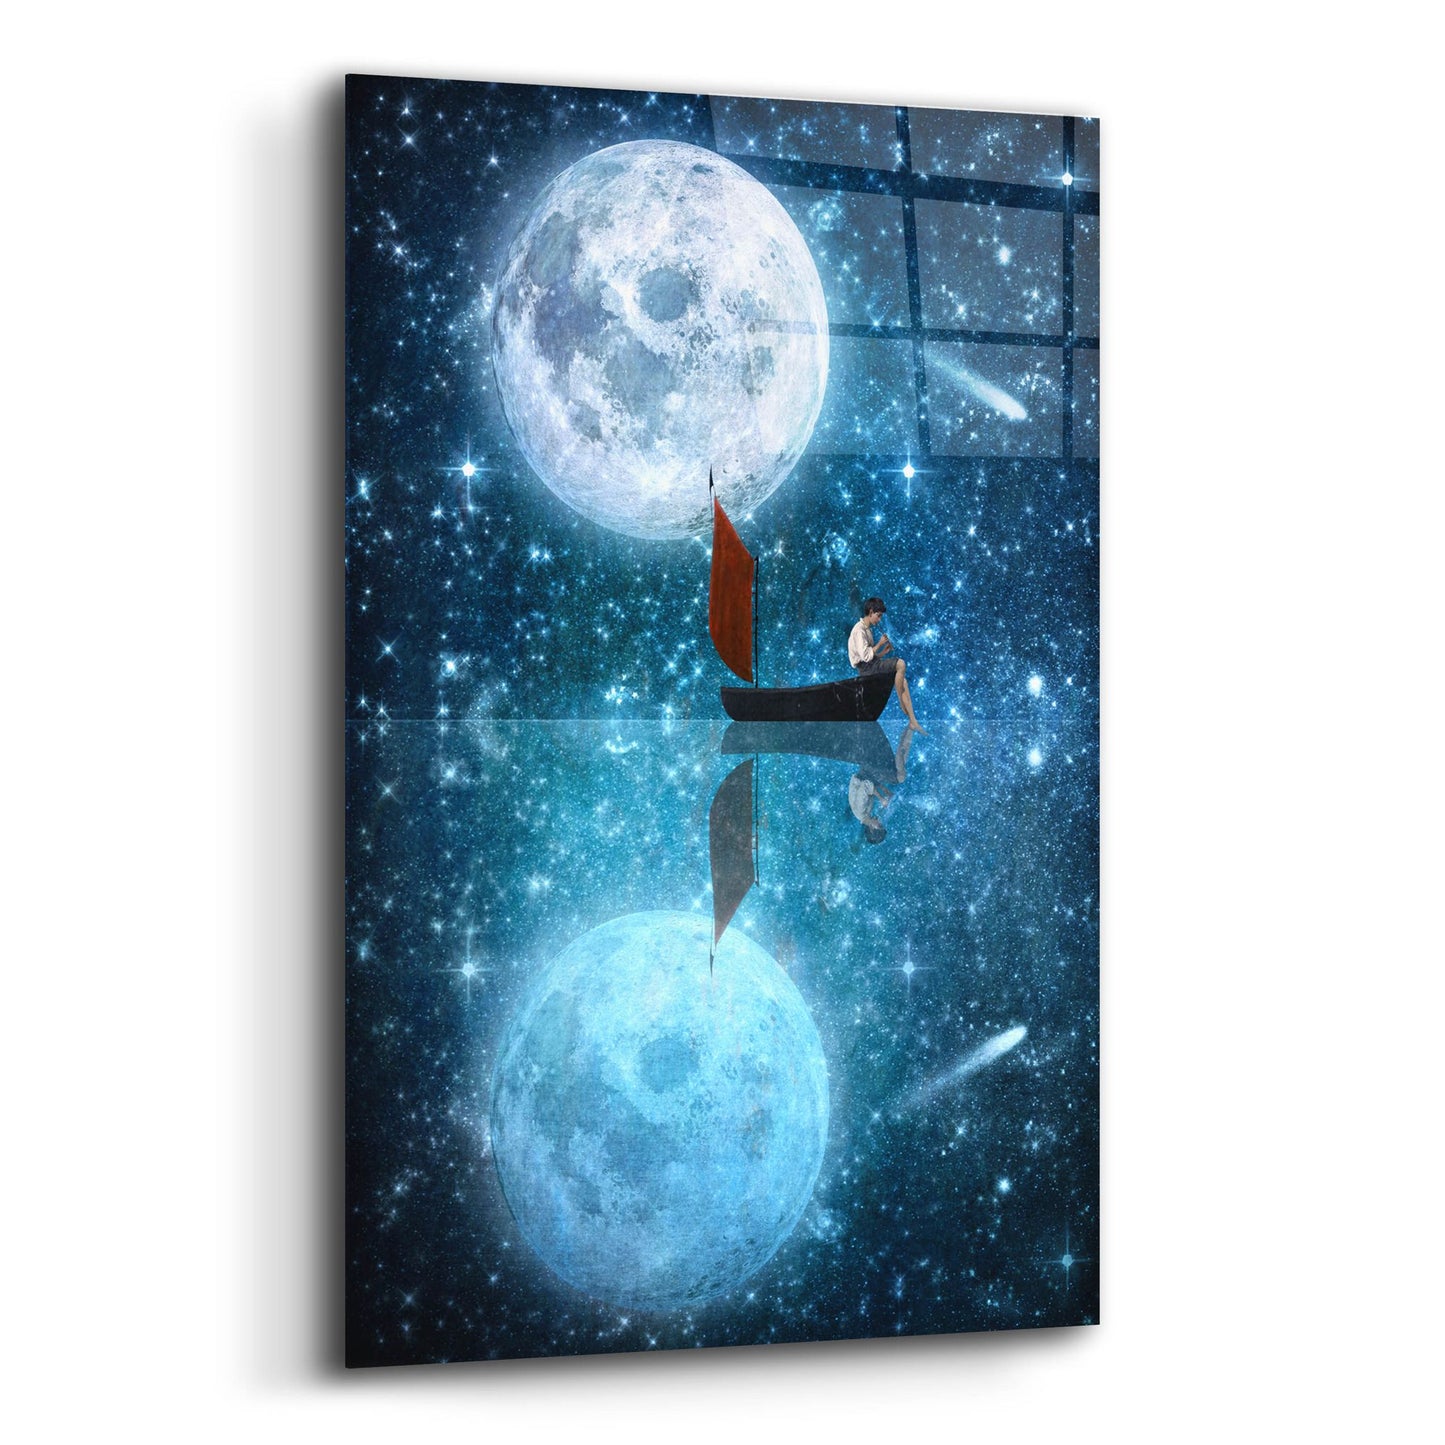 Epic Art 'The Moon And Me' by Diogo Verissimo, Acrylic Glass Wall Art,12x16